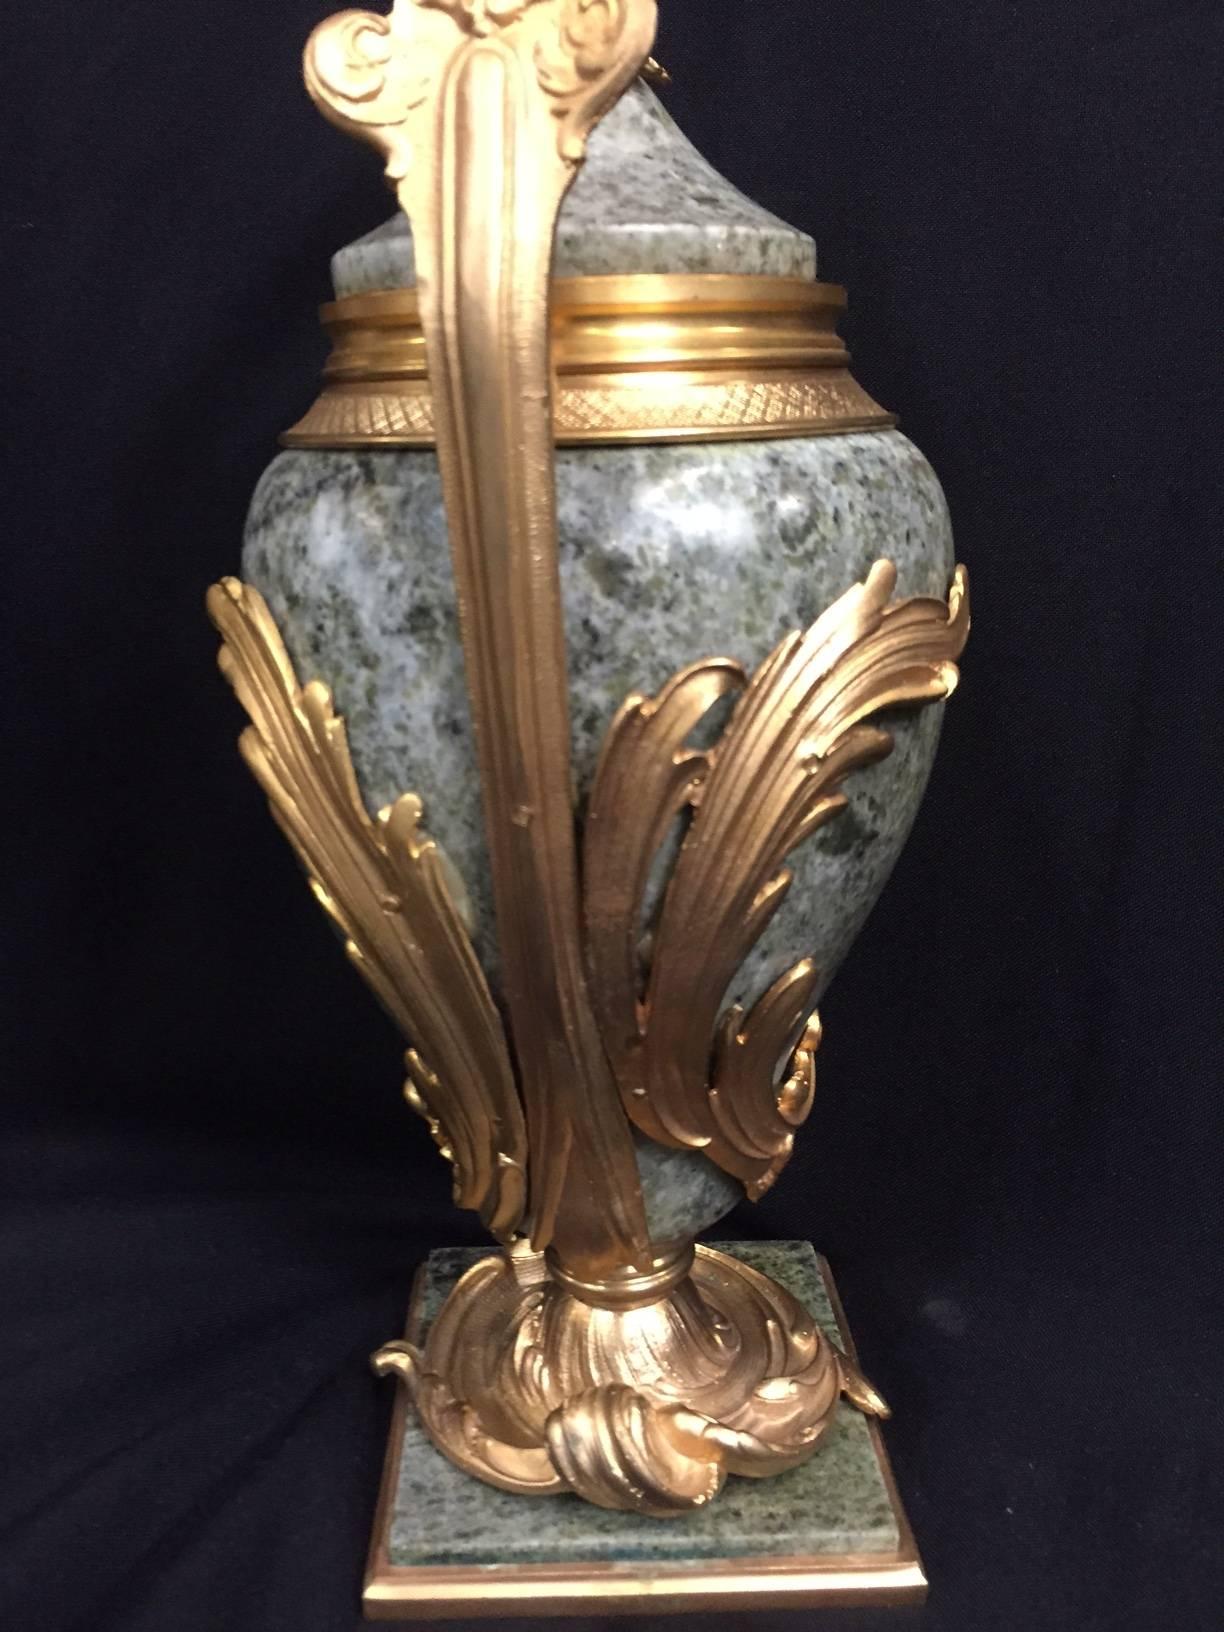 20th Century Pair of French Ormolu-Mounted Marble Urns with Cherubs